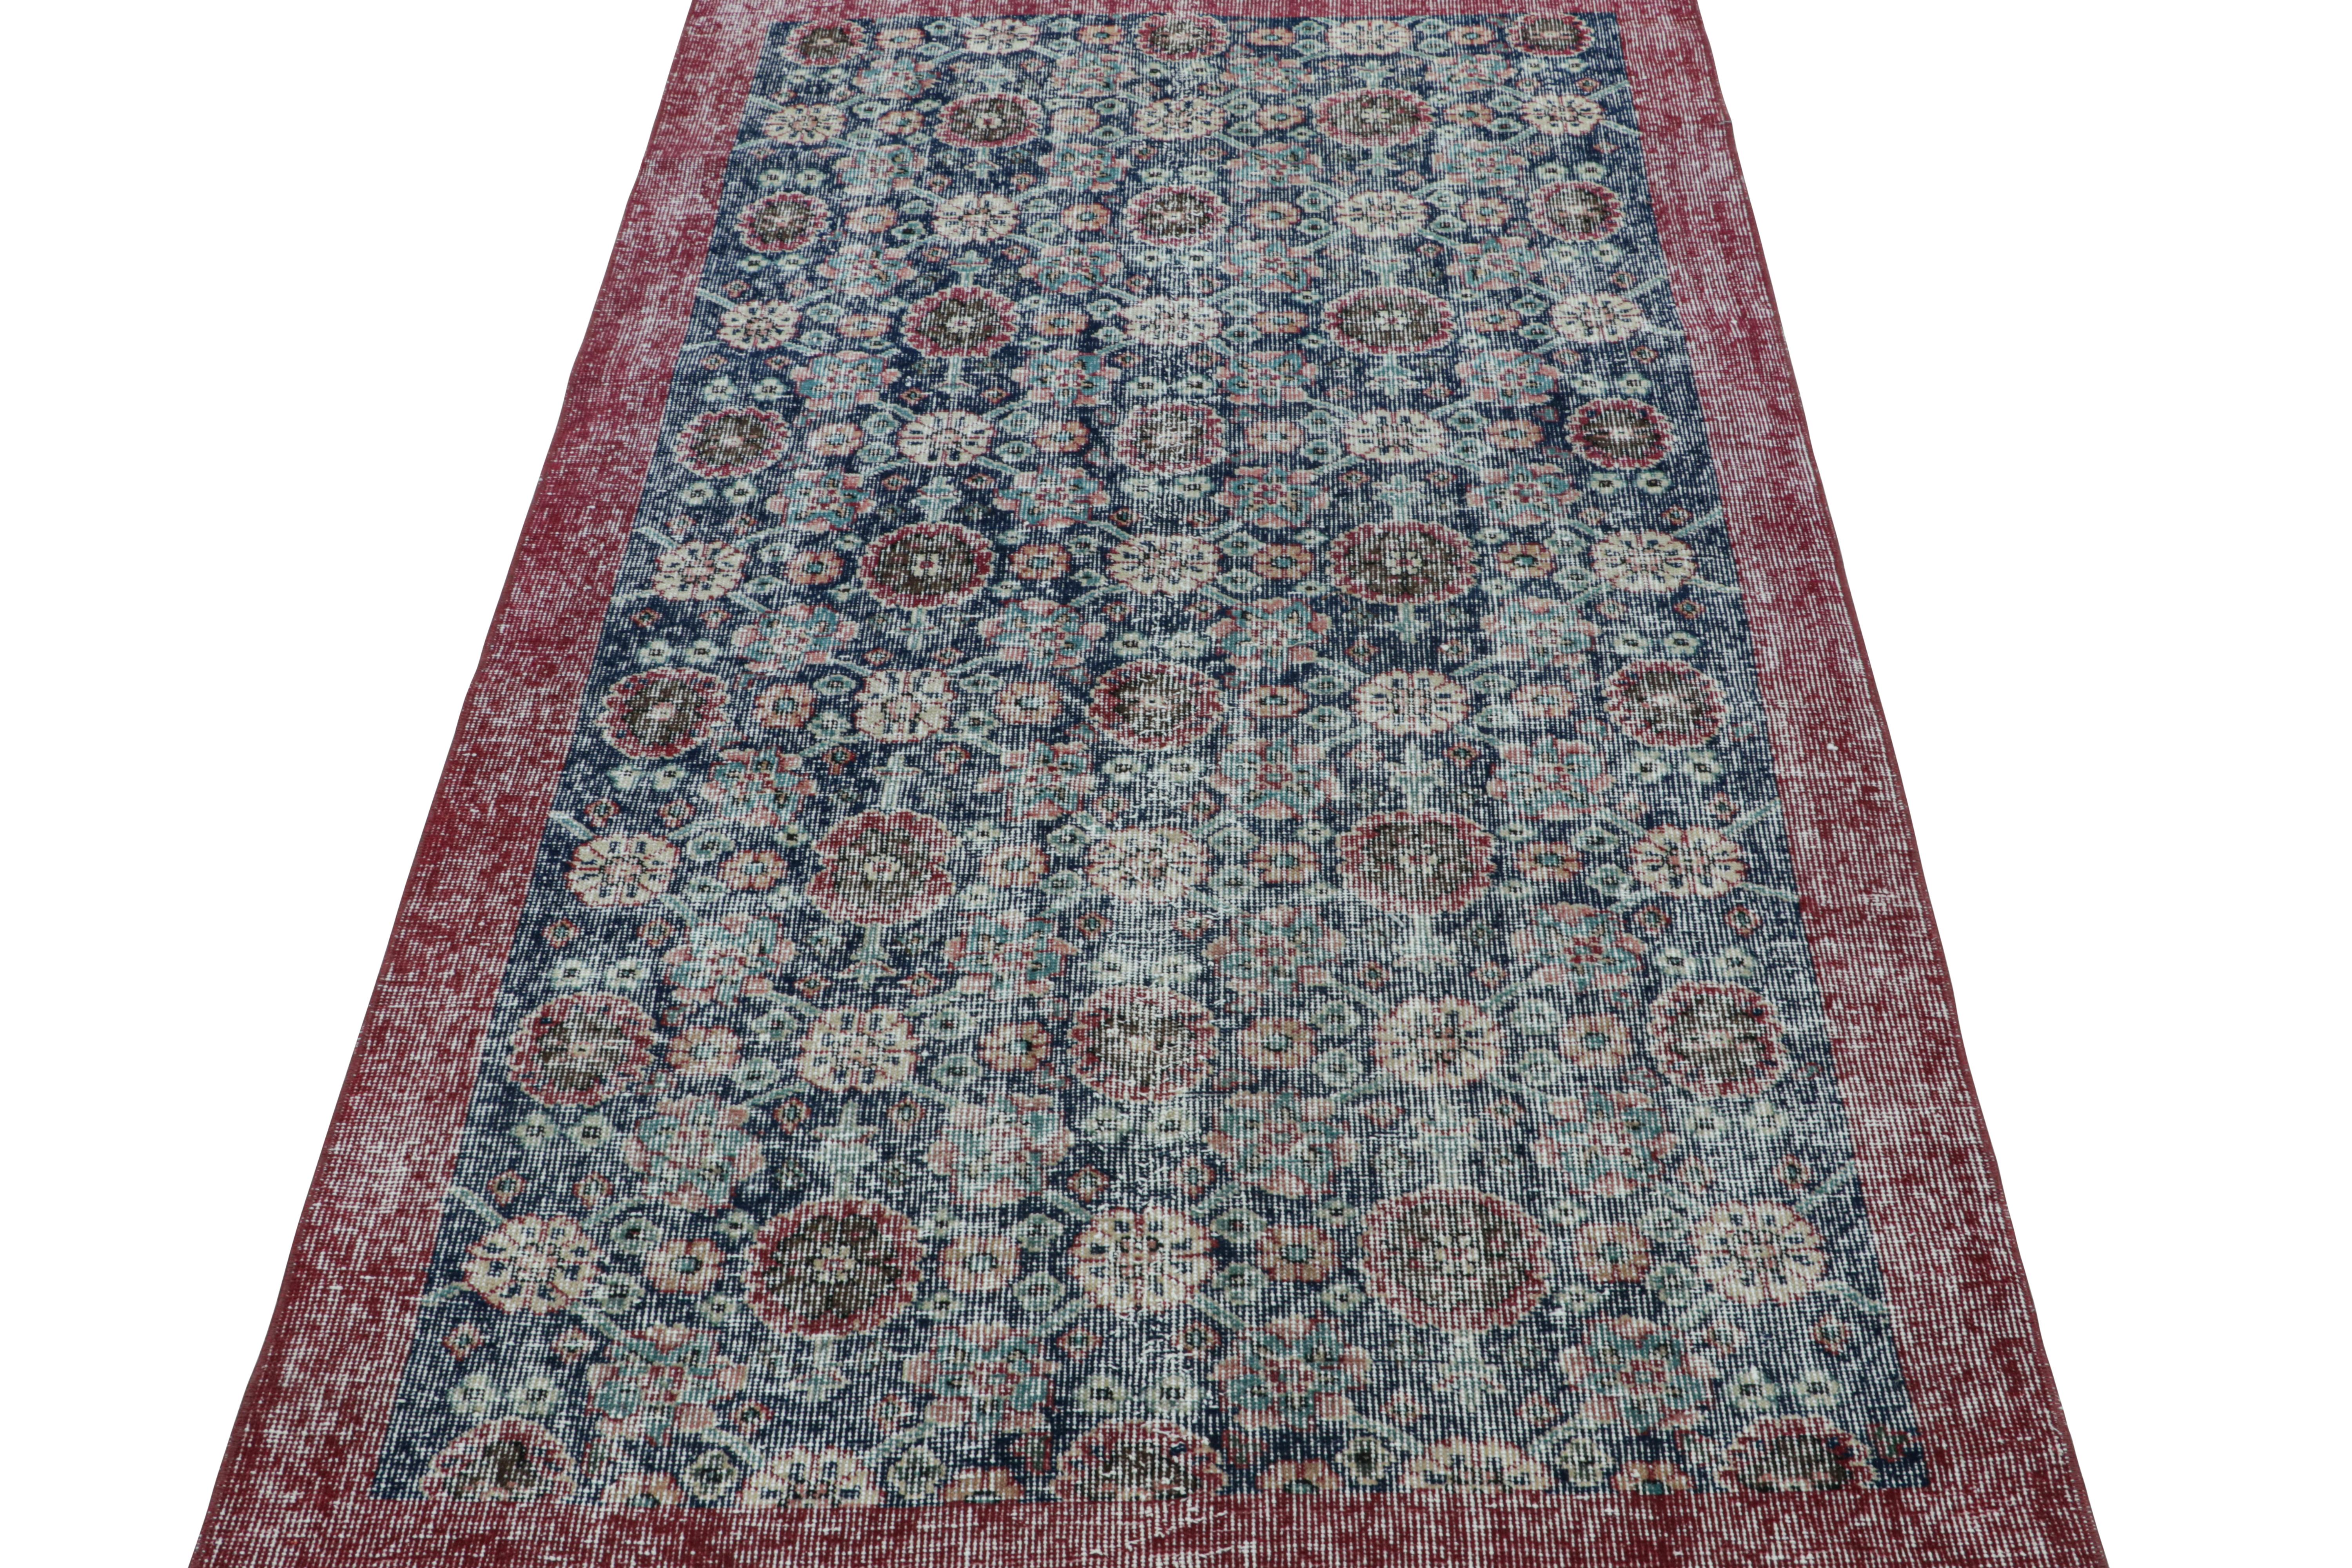 Turkish Vintage Runner Rug in Blue and Burgundy with Floral Patterns, from Rug & Kilim For Sale